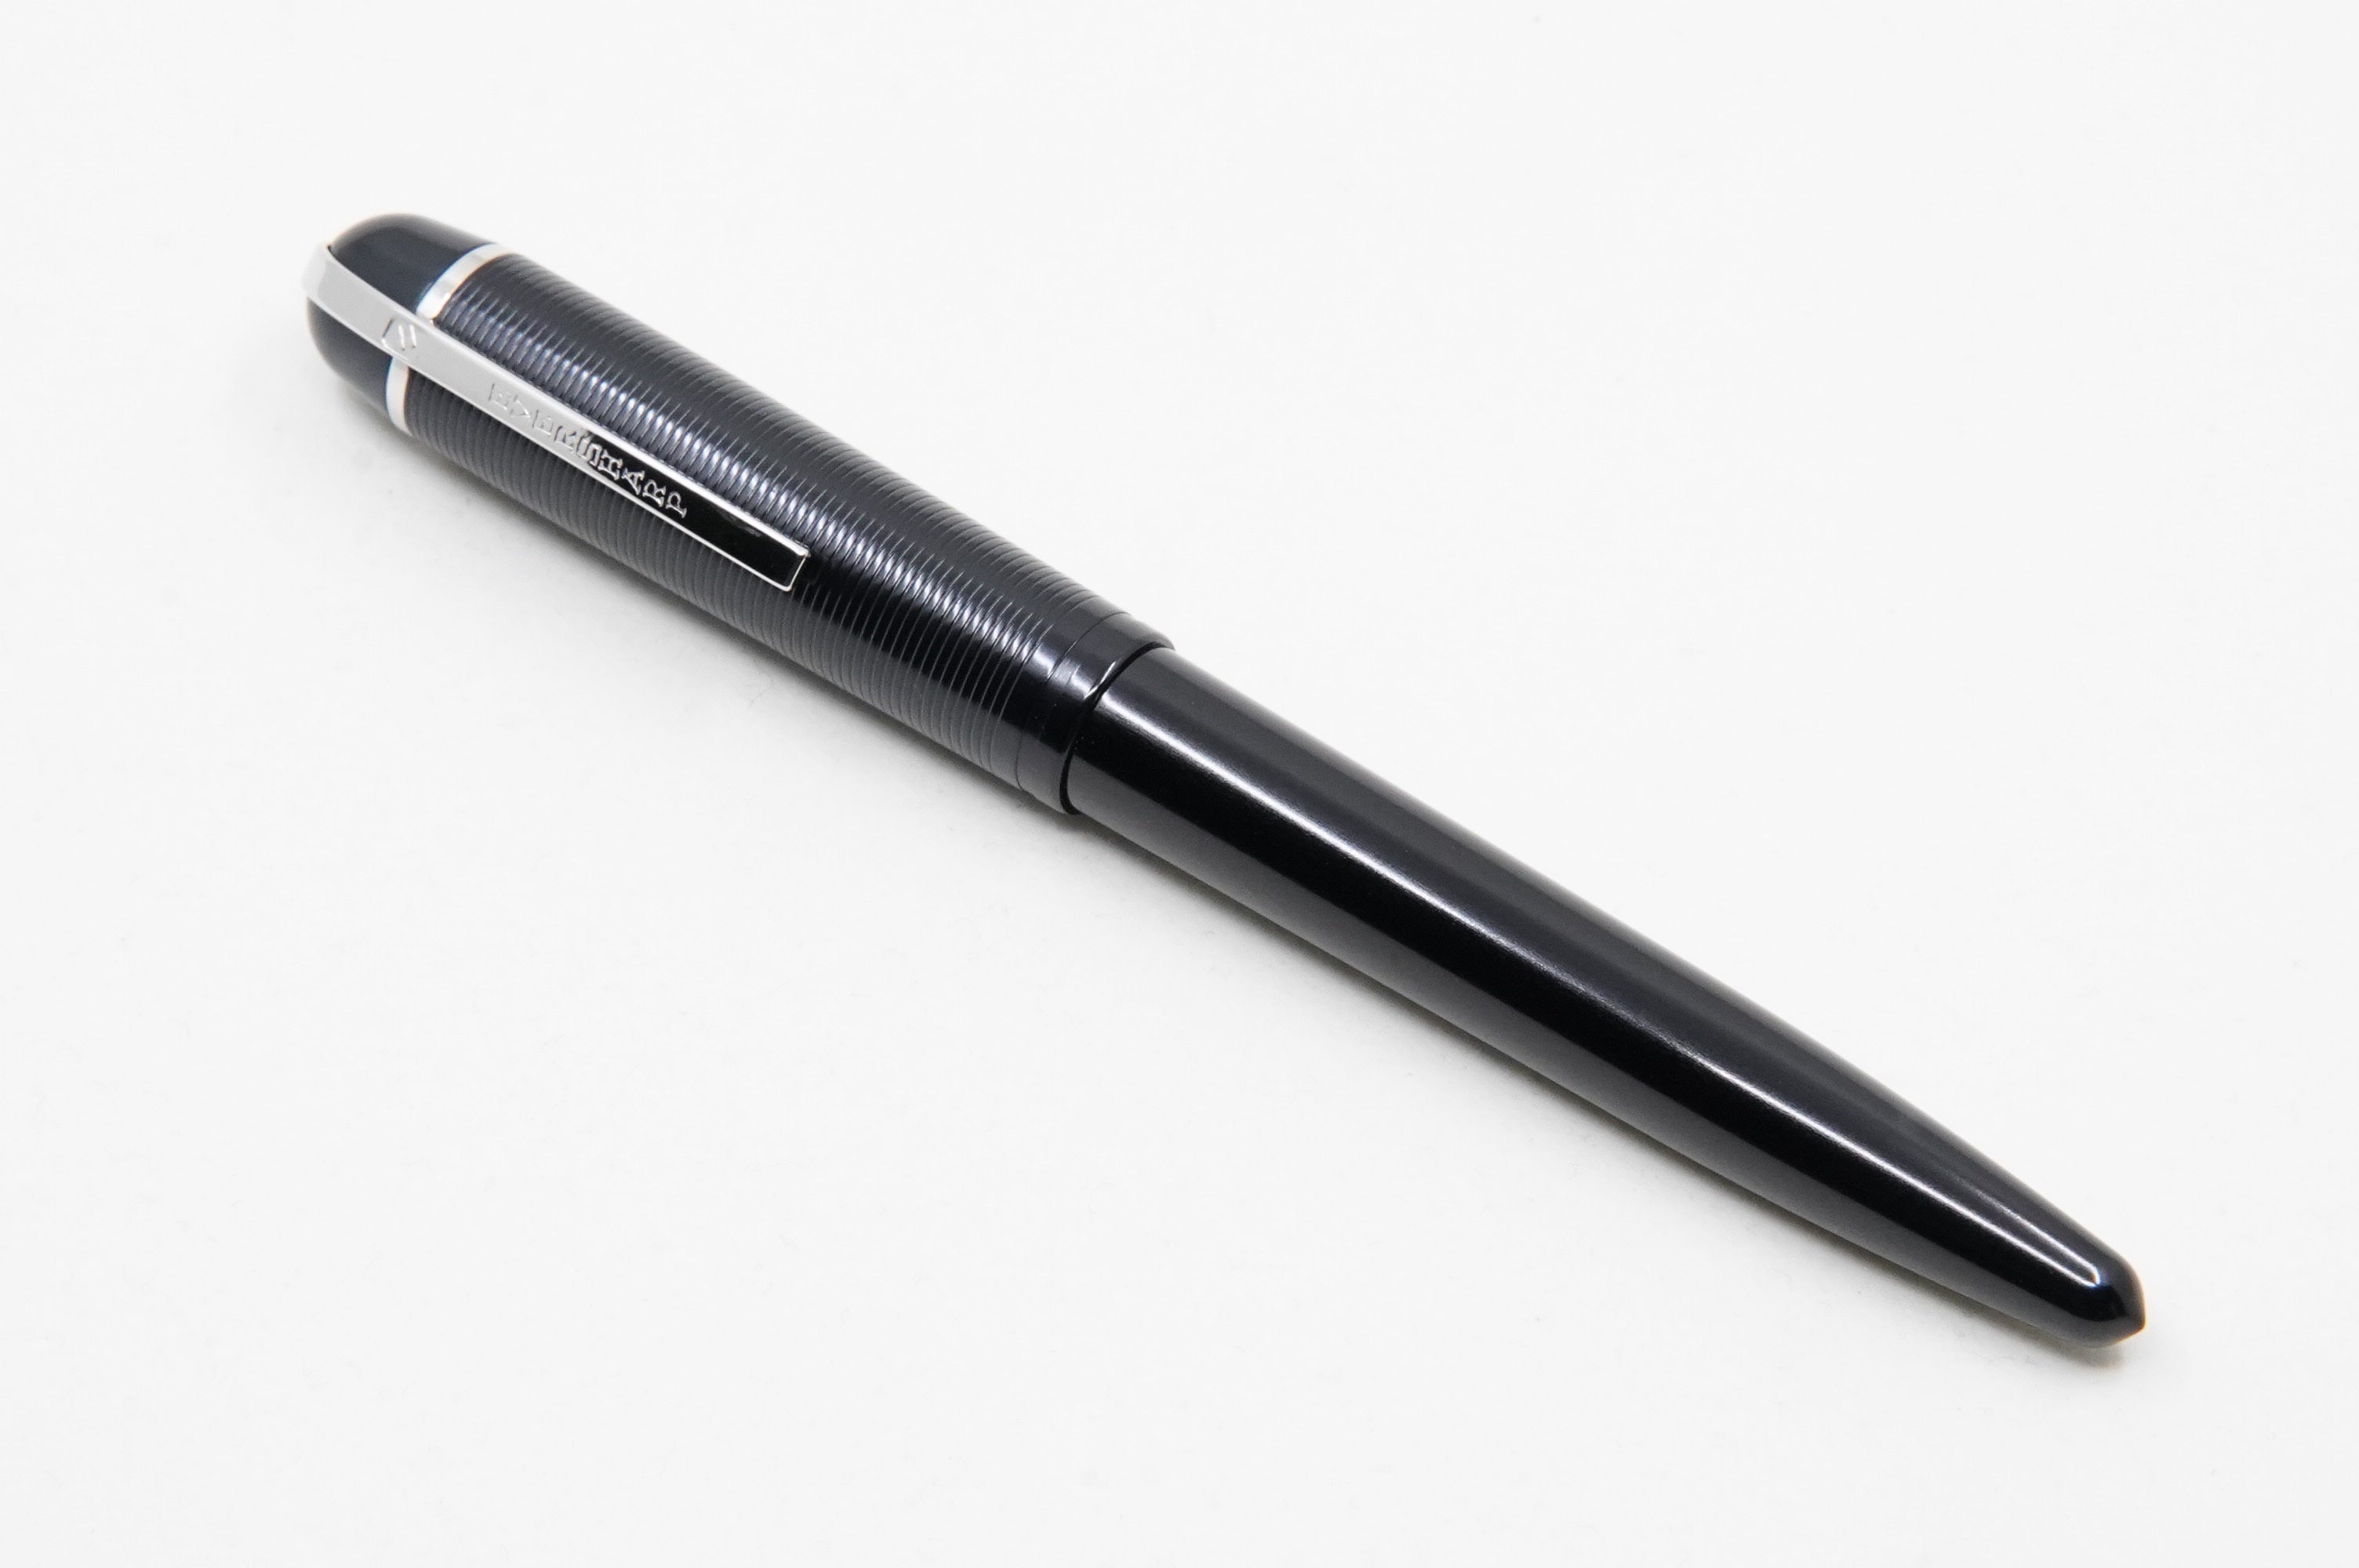 Wahl Eversharp Skyline FP Aluminum Black - The iconic SKYLINE created by Henry Dreyfus in 1939